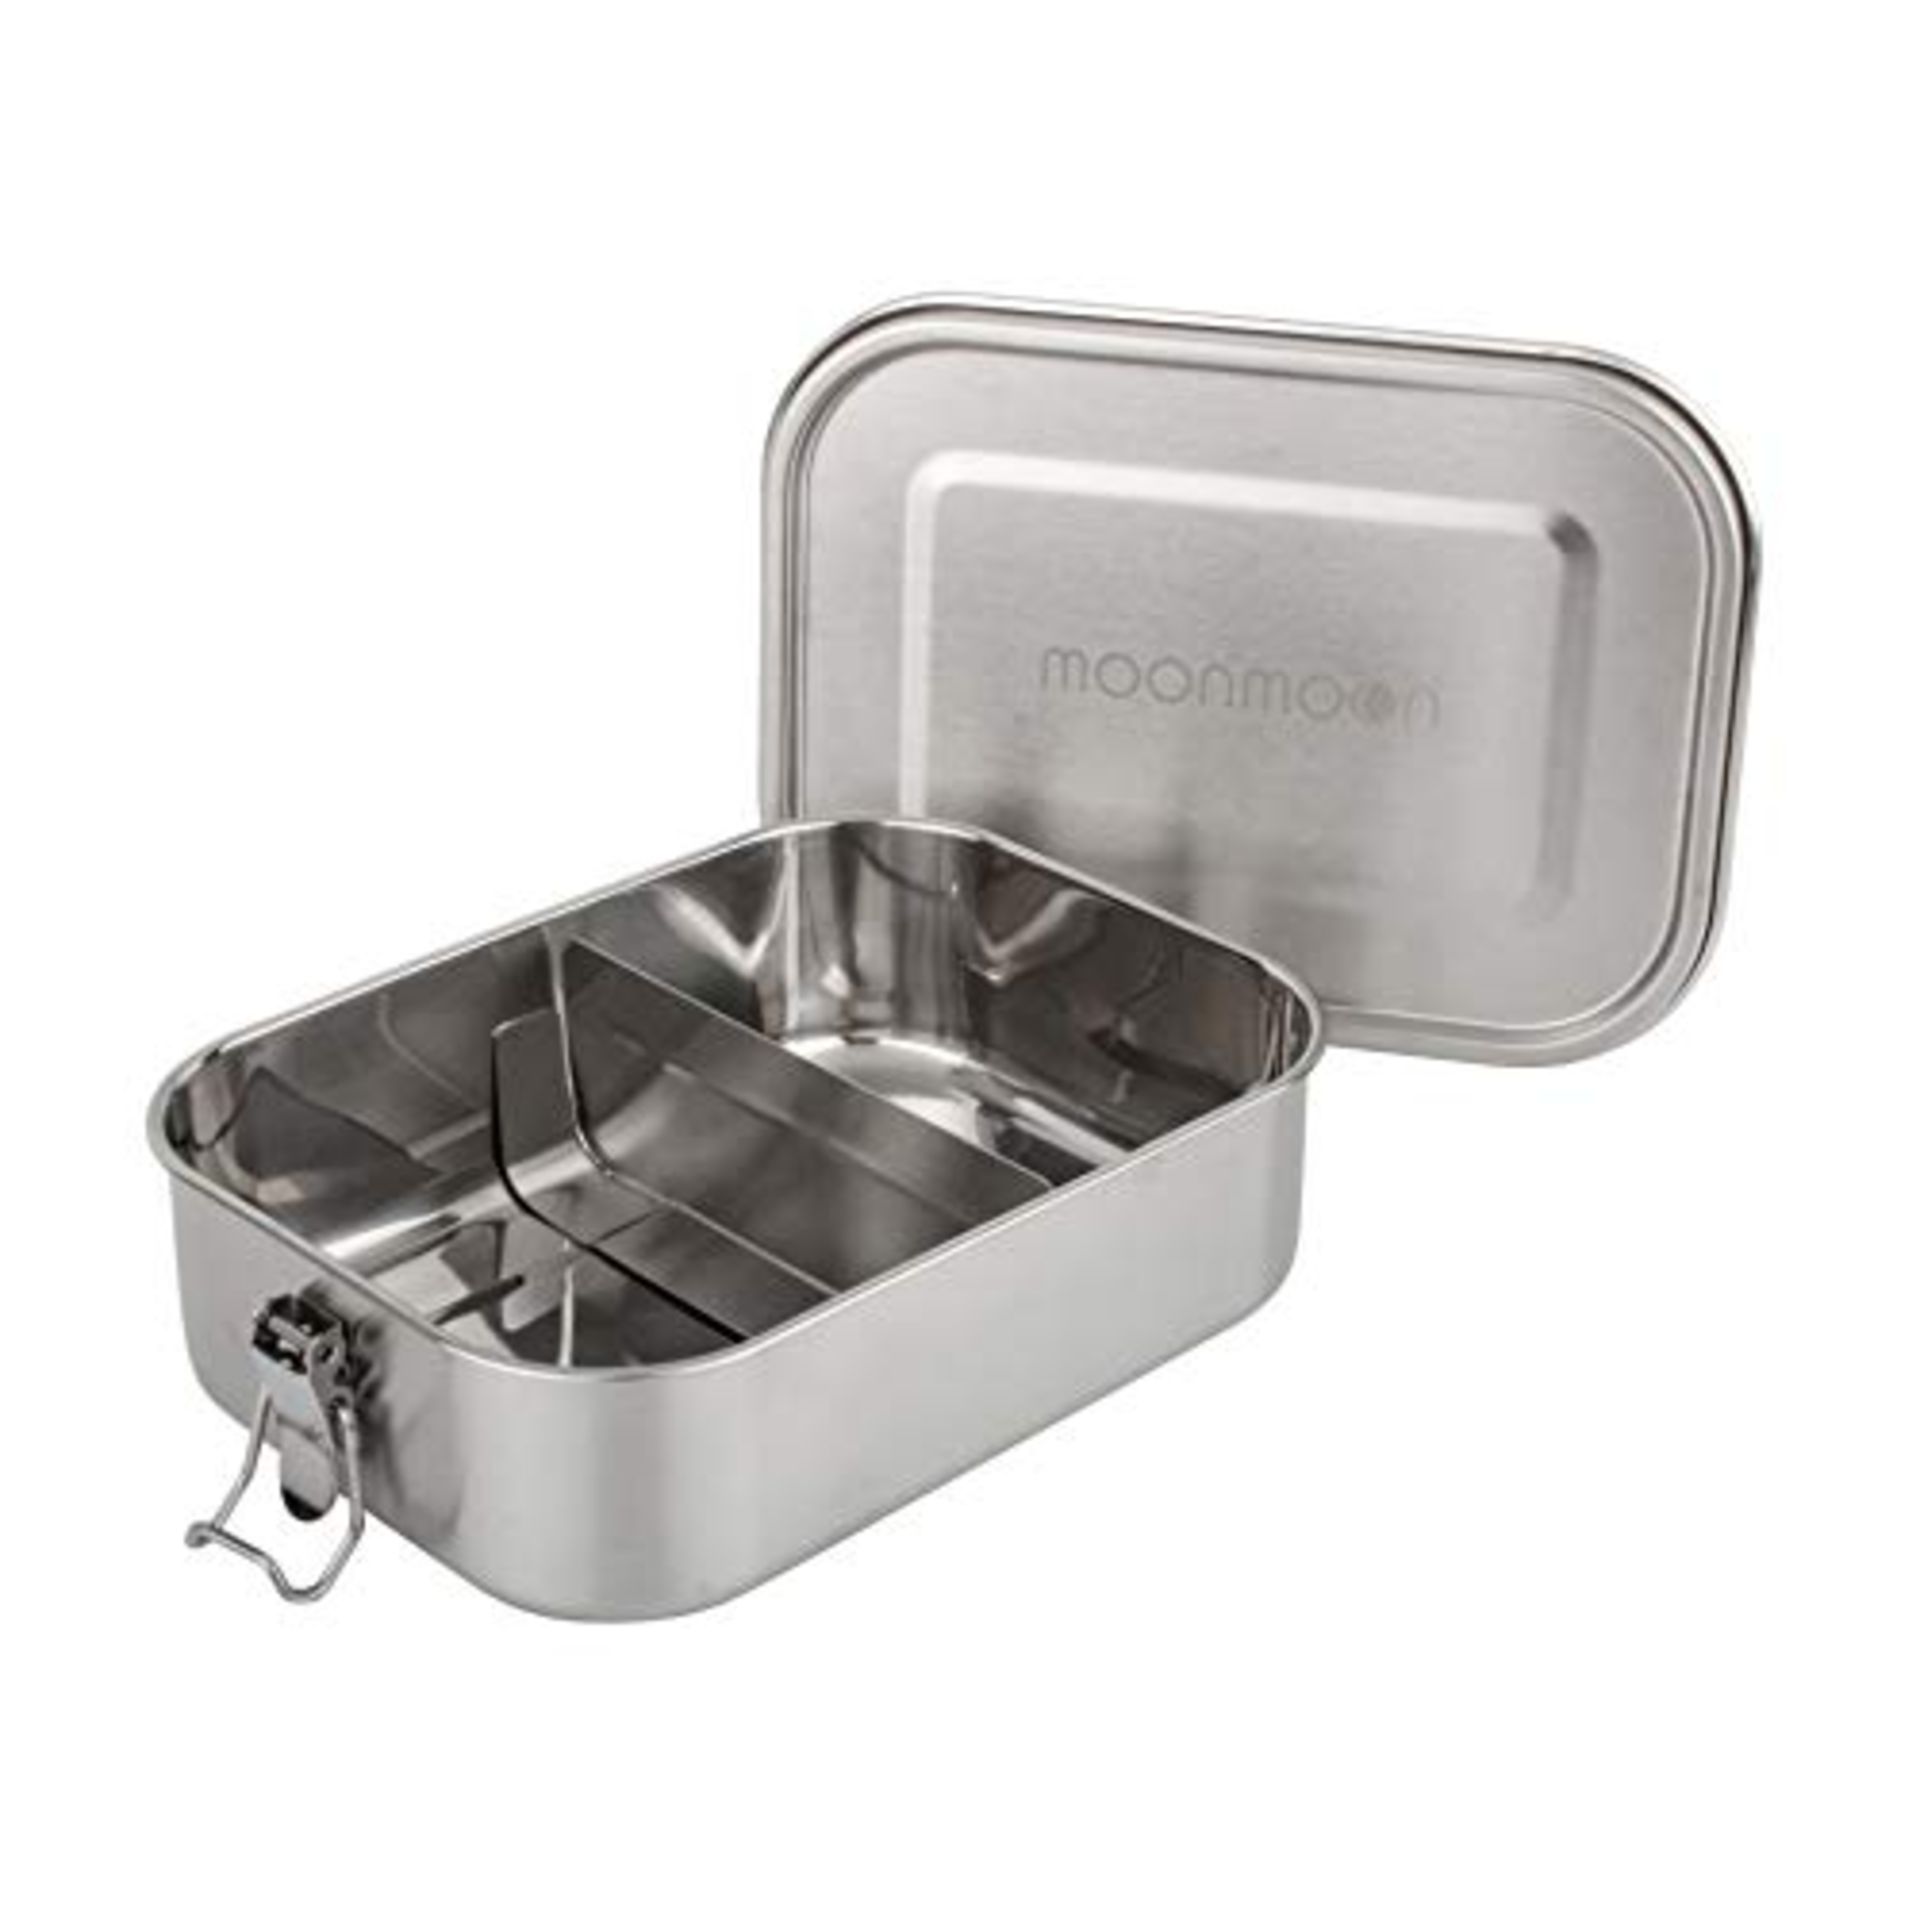 Moonmoon Stainless Steel Lunch Box | Eco-Friendly 1.2 Litre Leakproof Bento Box with c - Image 4 of 12